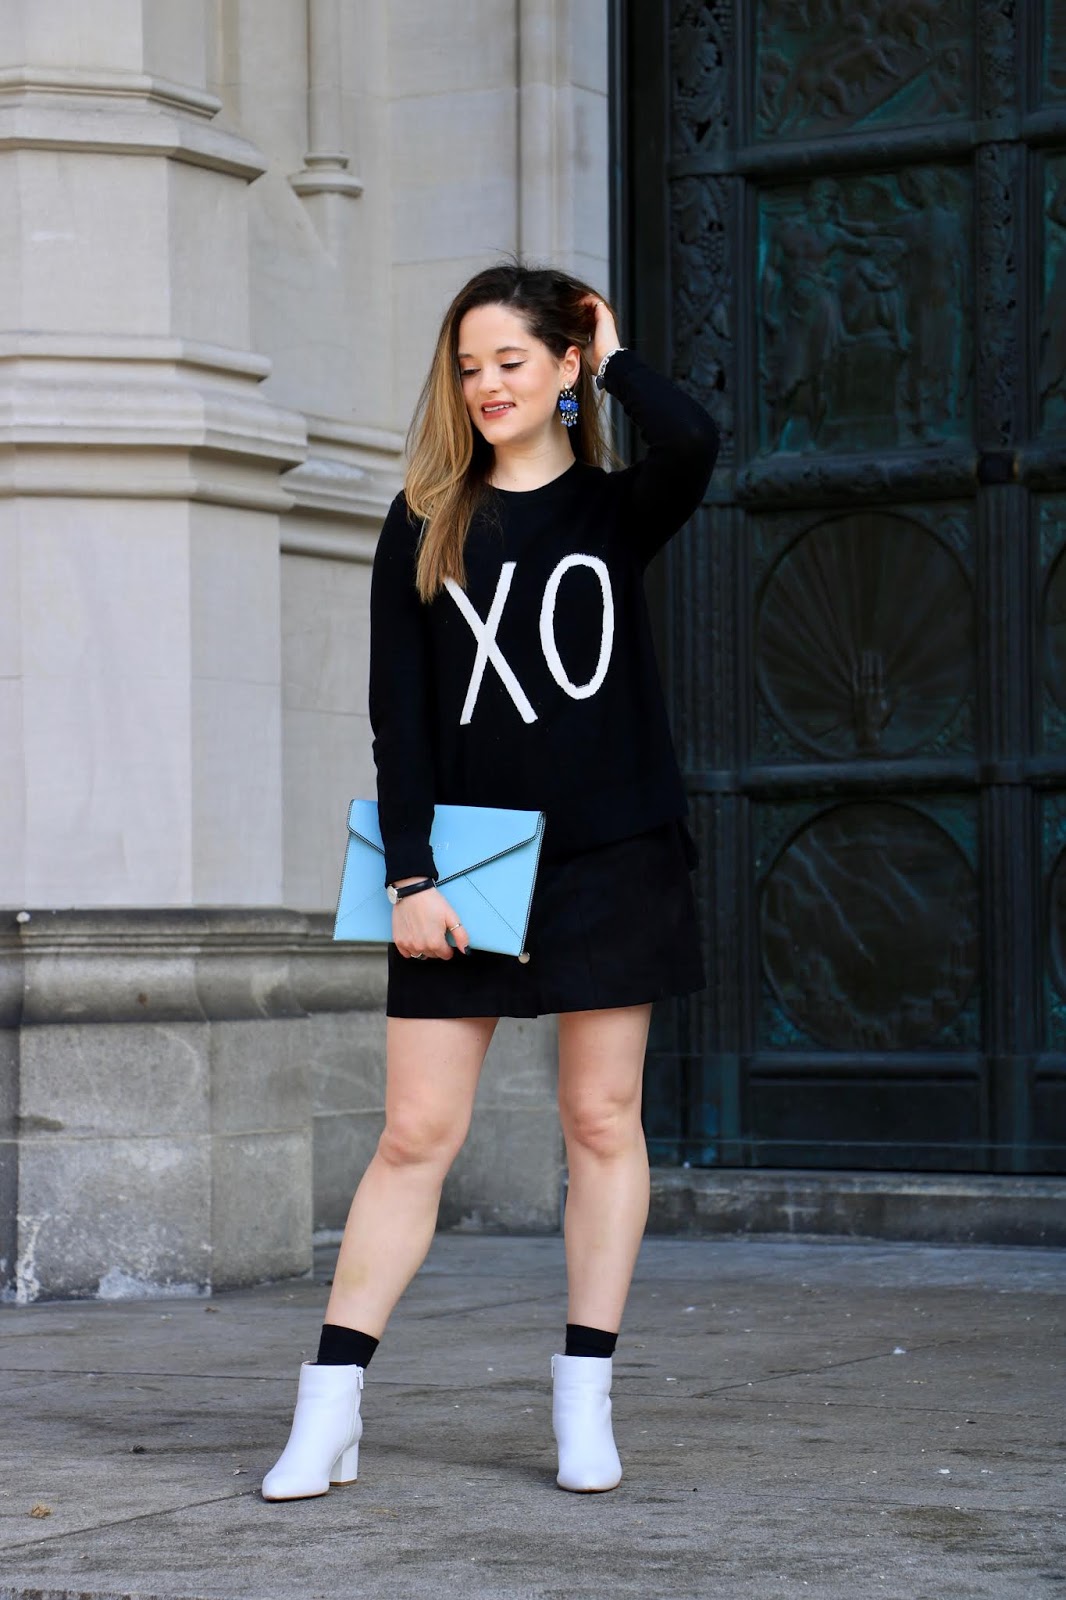 Nyc fashion blogger Kathleen Harper's spring date outfit idea